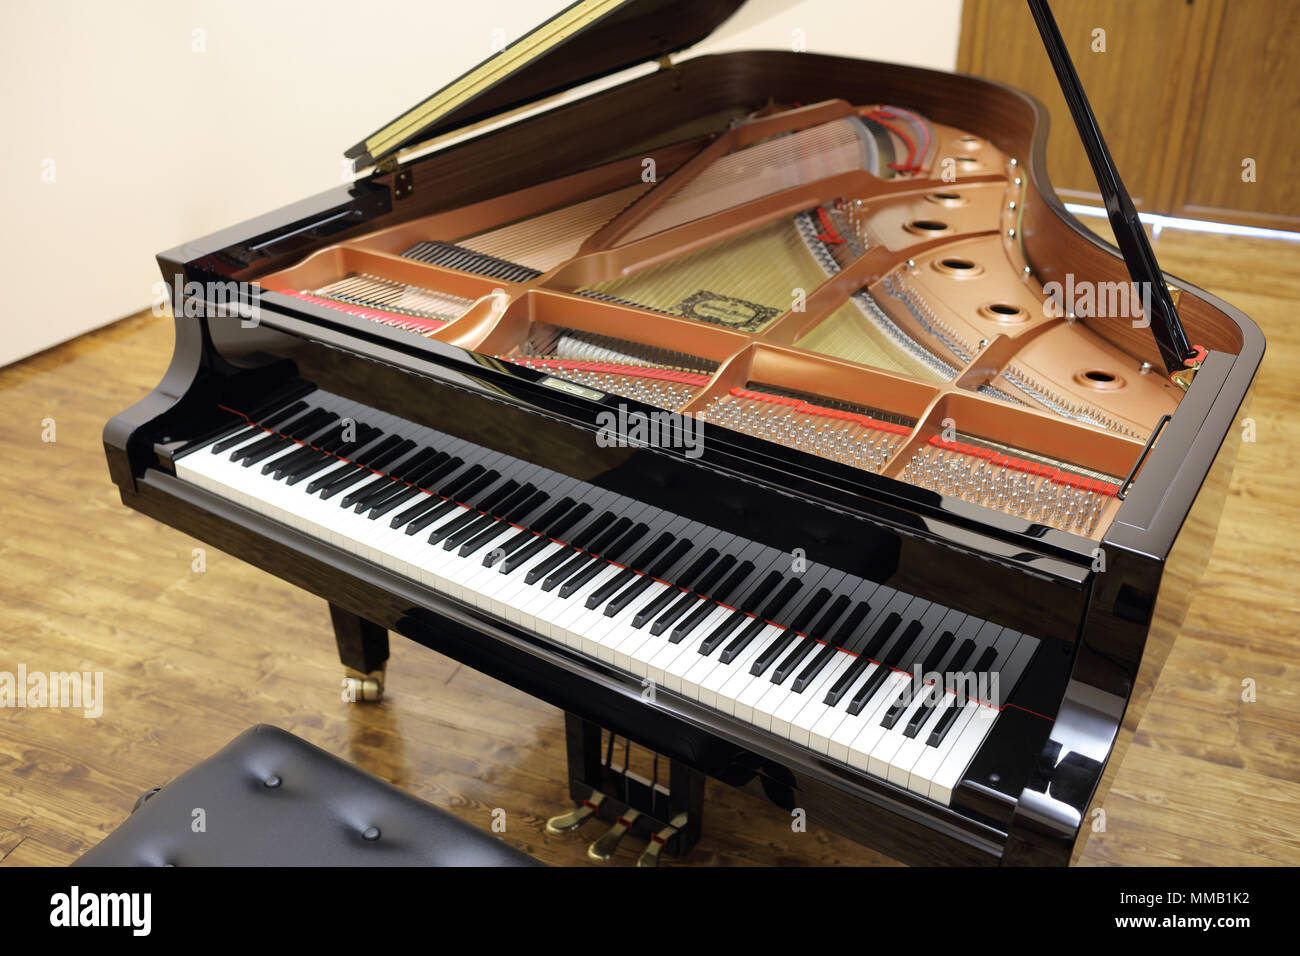 Top view shot of a grand piano indoors Stock Photo - Alamy